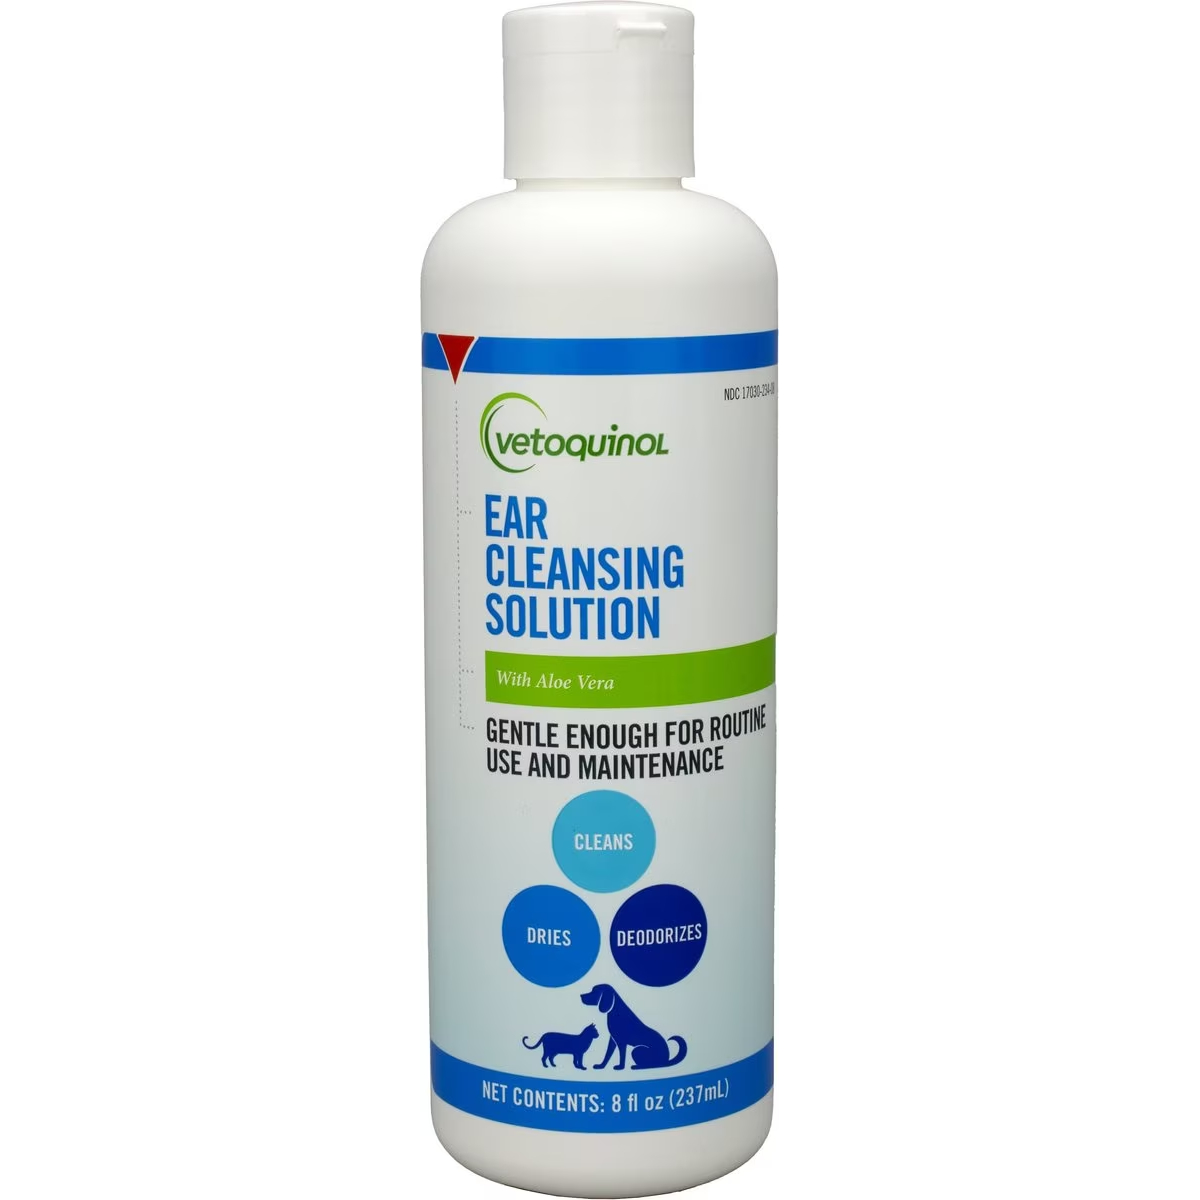 Vetoquinol Ear Cleaning Solution for Dogs & Cats